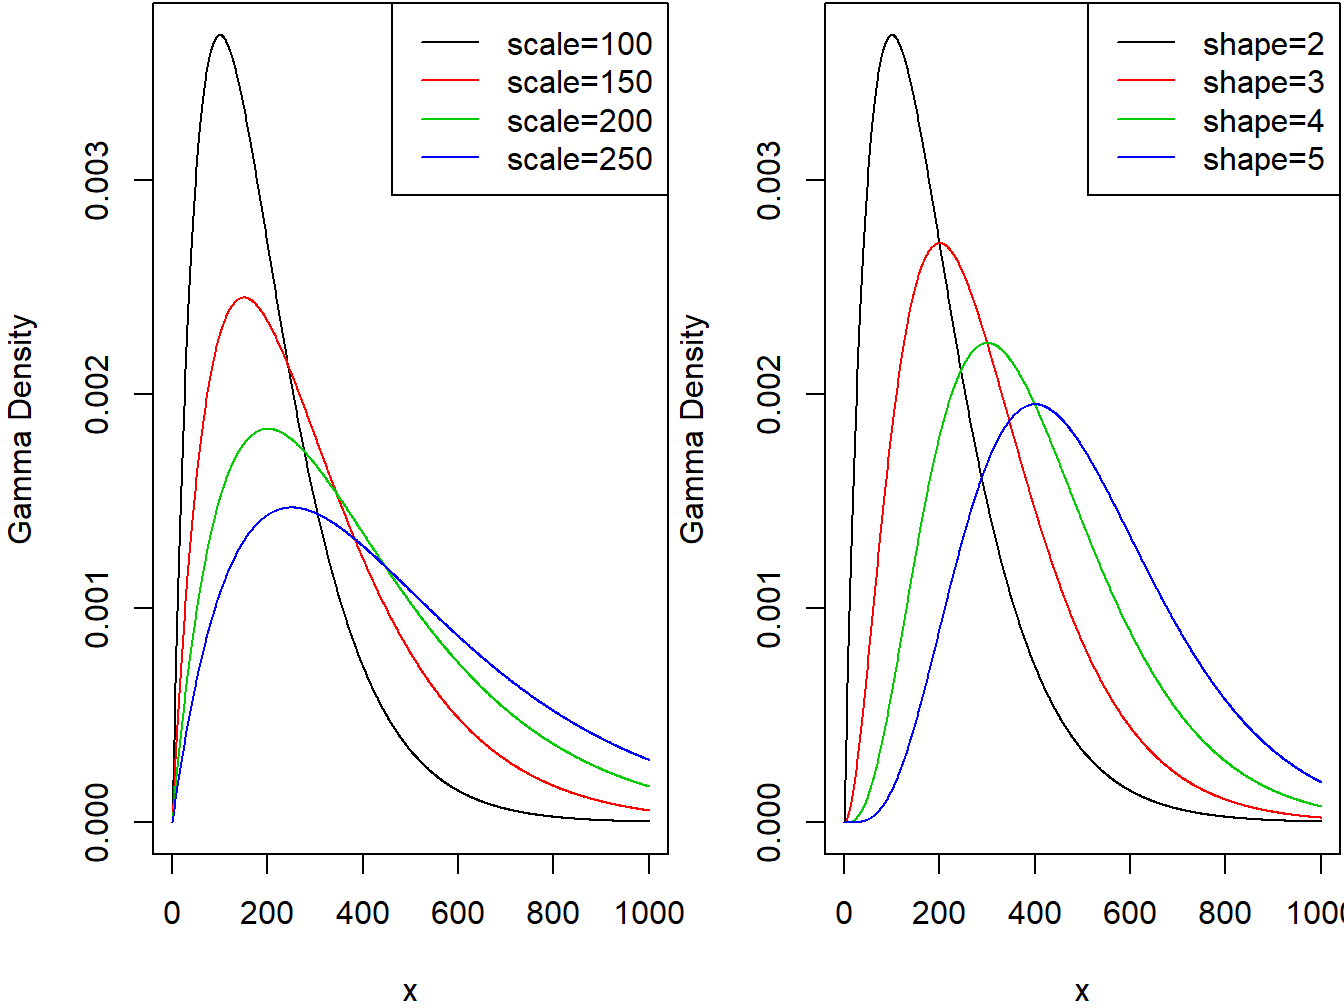 Gamma Densities. The left-hand panel is with shape=2 and varying scale. The right-hand panel is with scale=100 and varying shape.